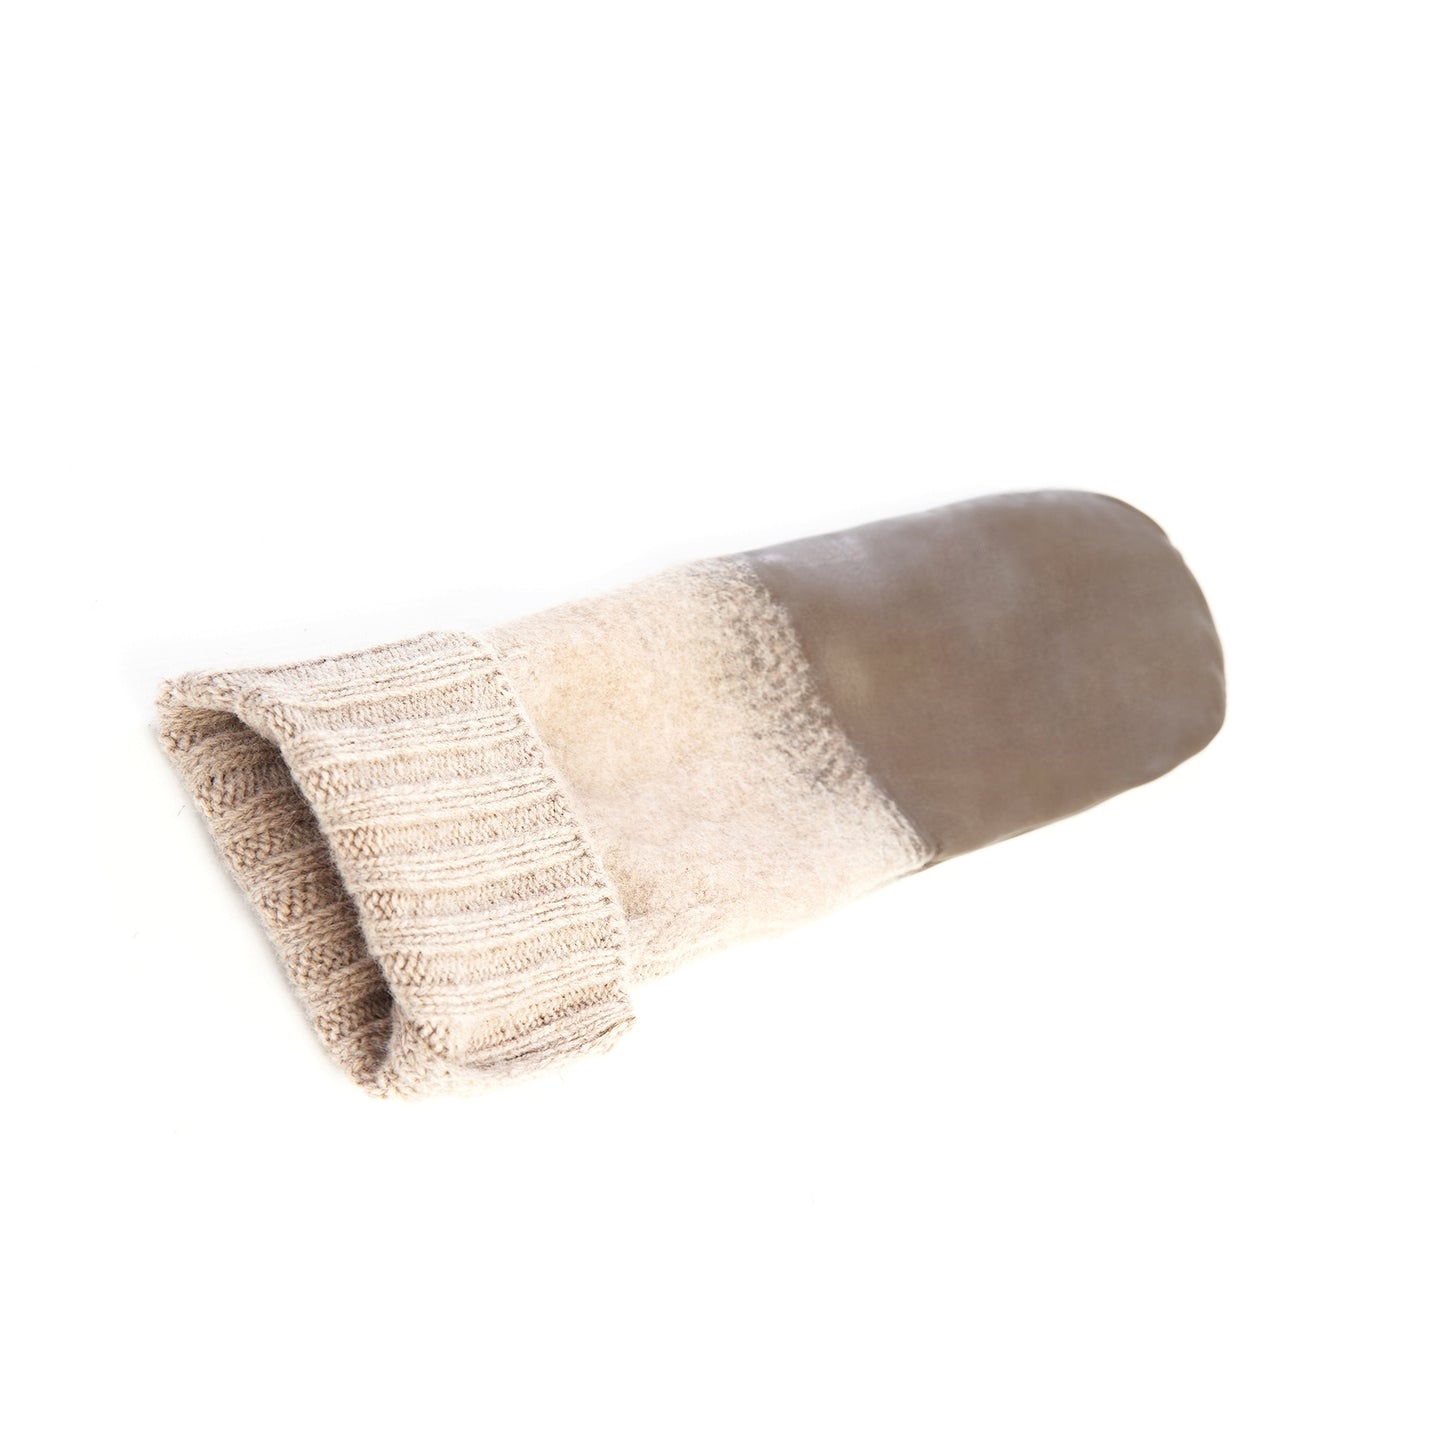 Women's mitten gloves in colour mud nappa leather with wool needle punch details